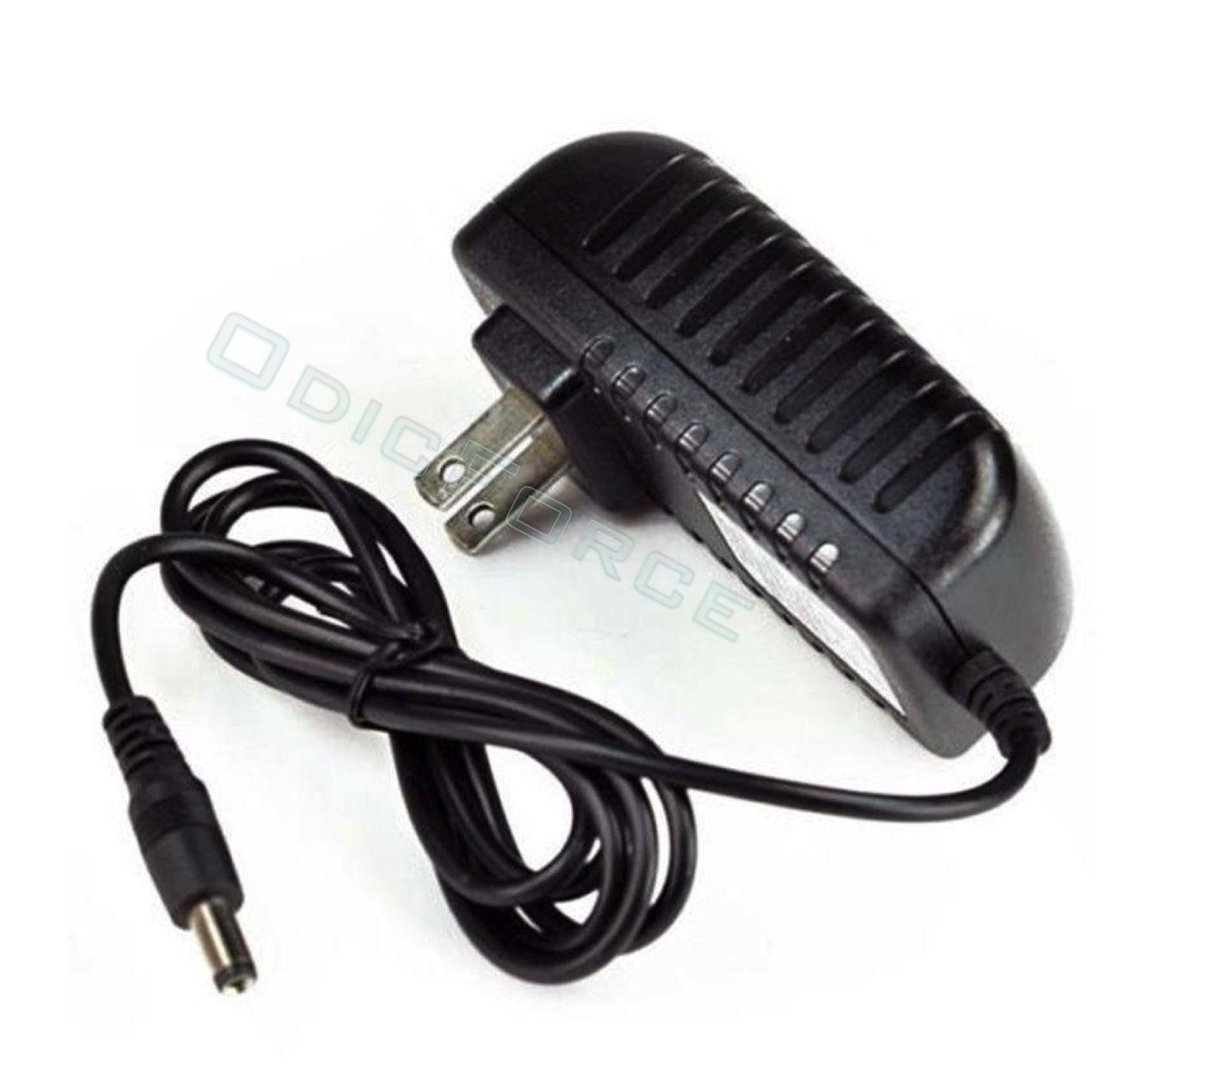 US Plug DC 12V 2A Power Supply Adapter 100-240V Input,  5.5mm x 2.1mm Connector